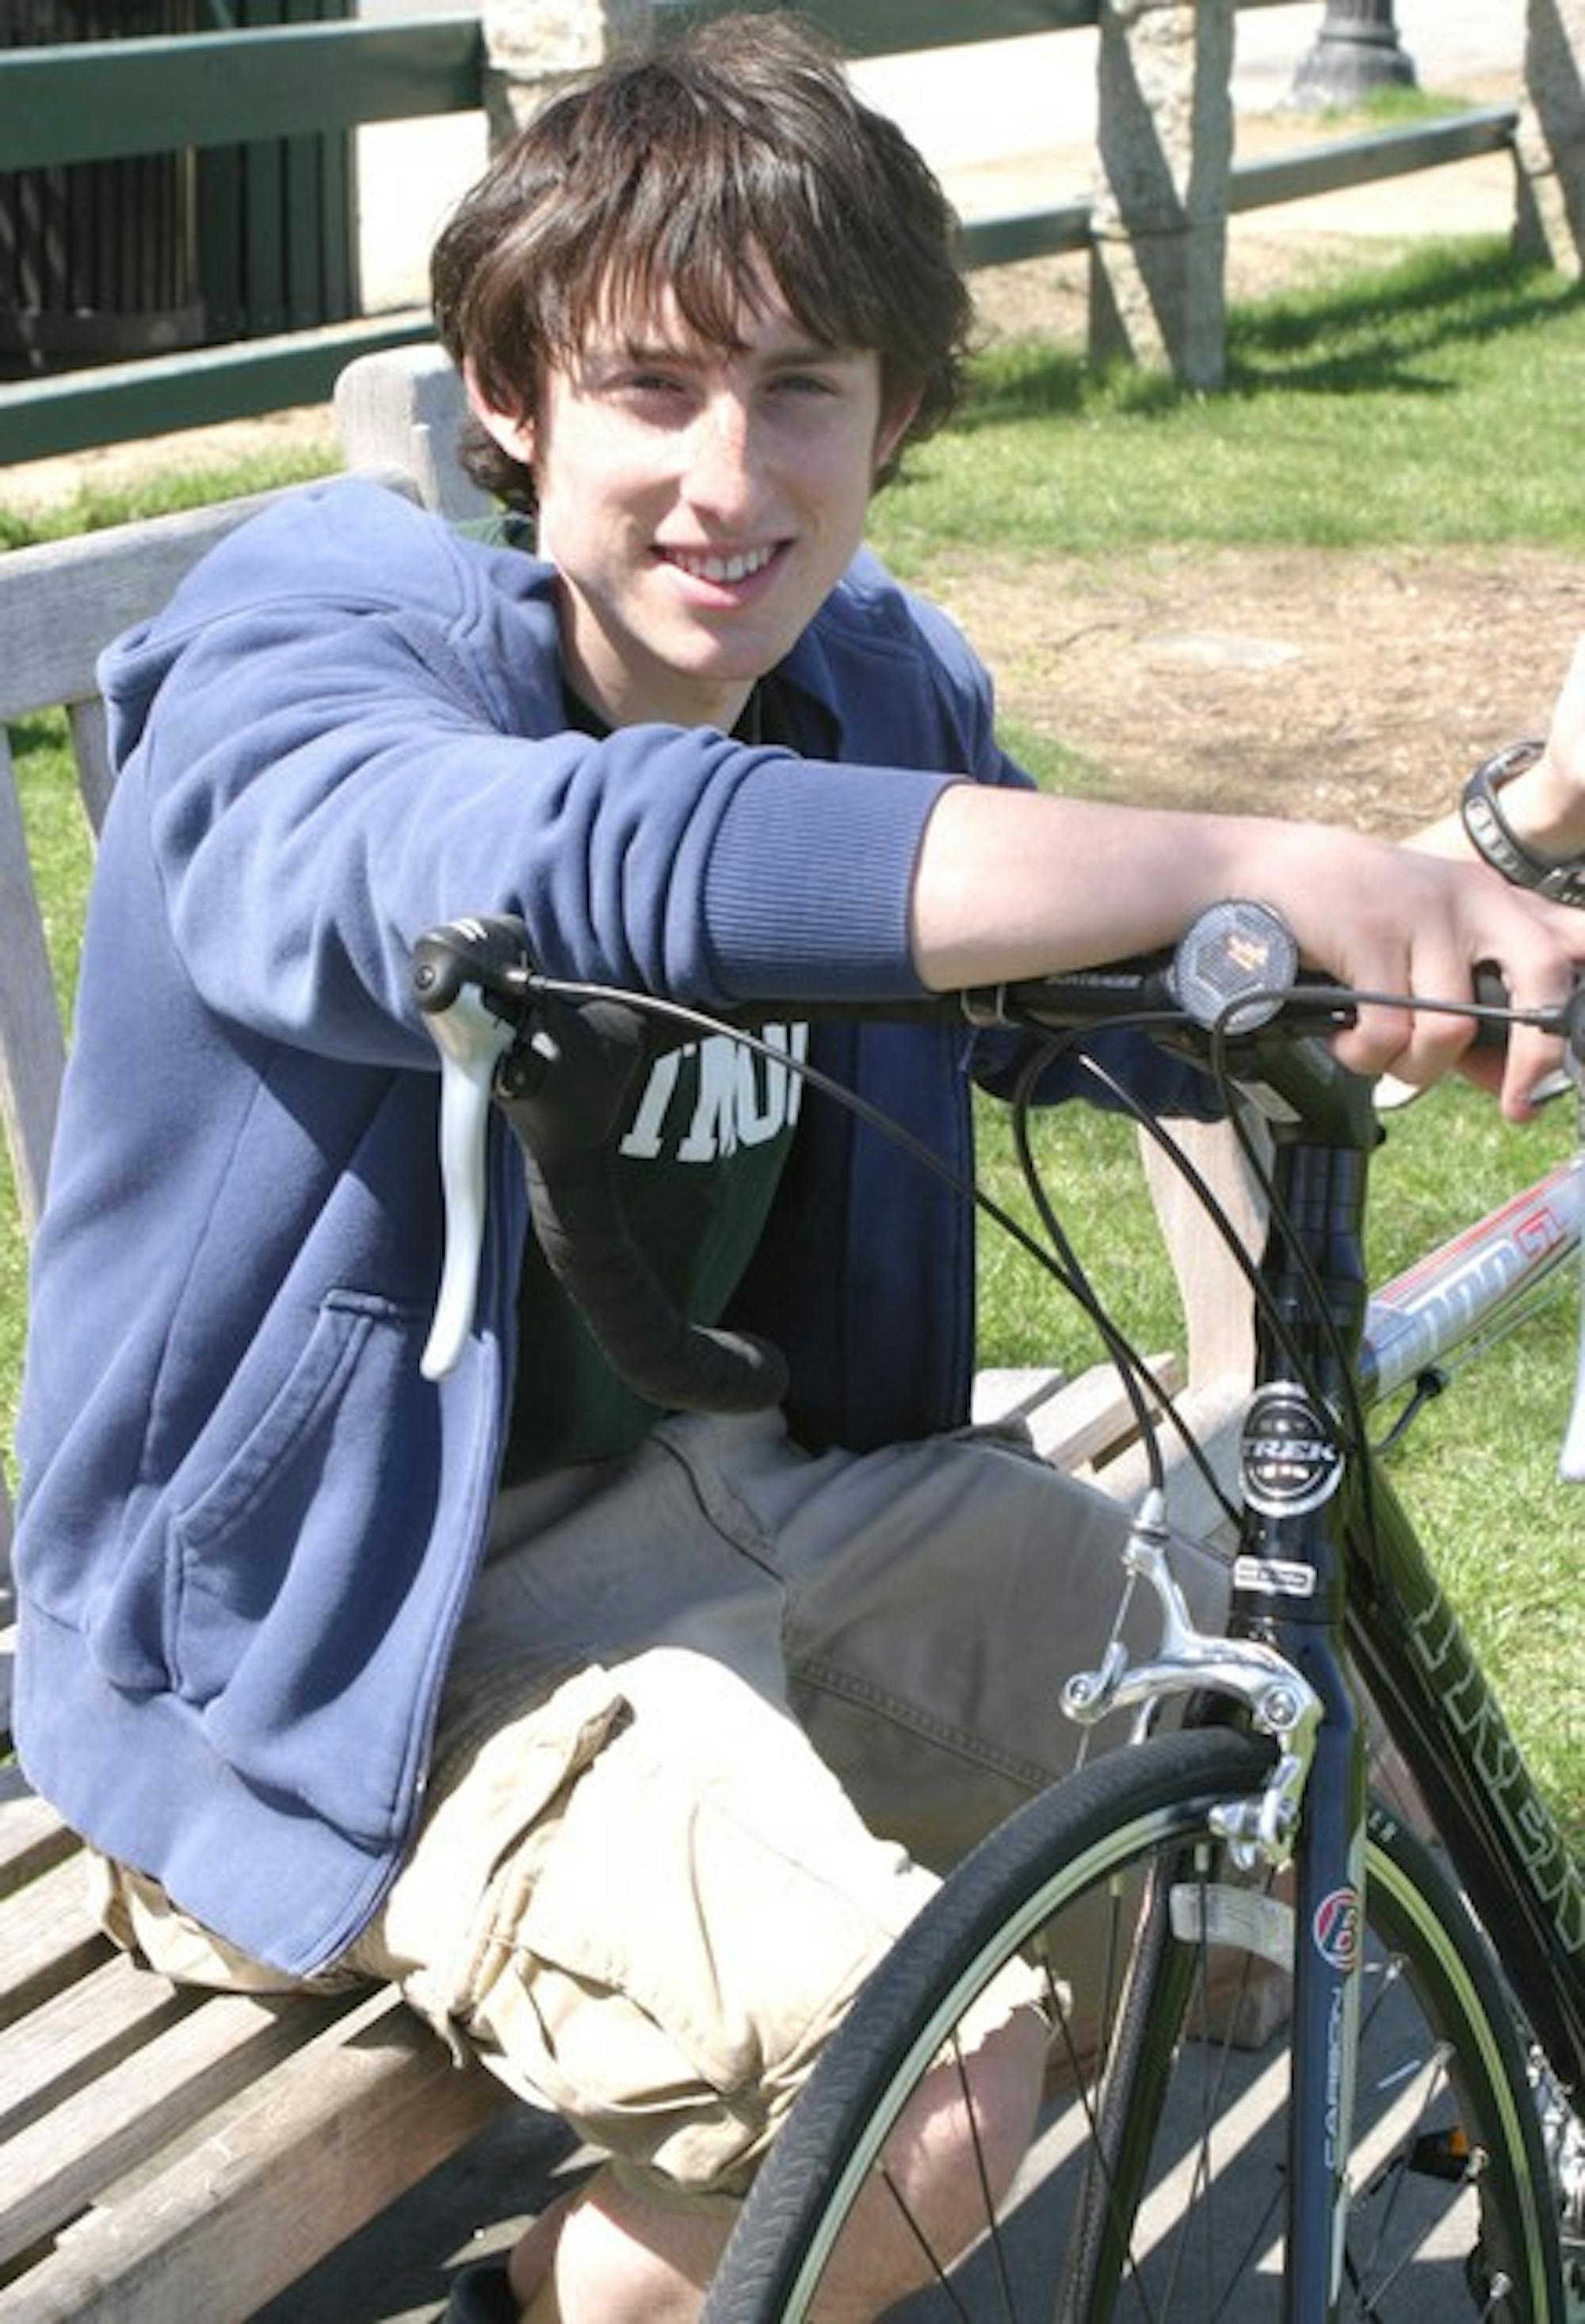 Bike and Build participant Billy Corbett '10 sits with his bike on the Green.